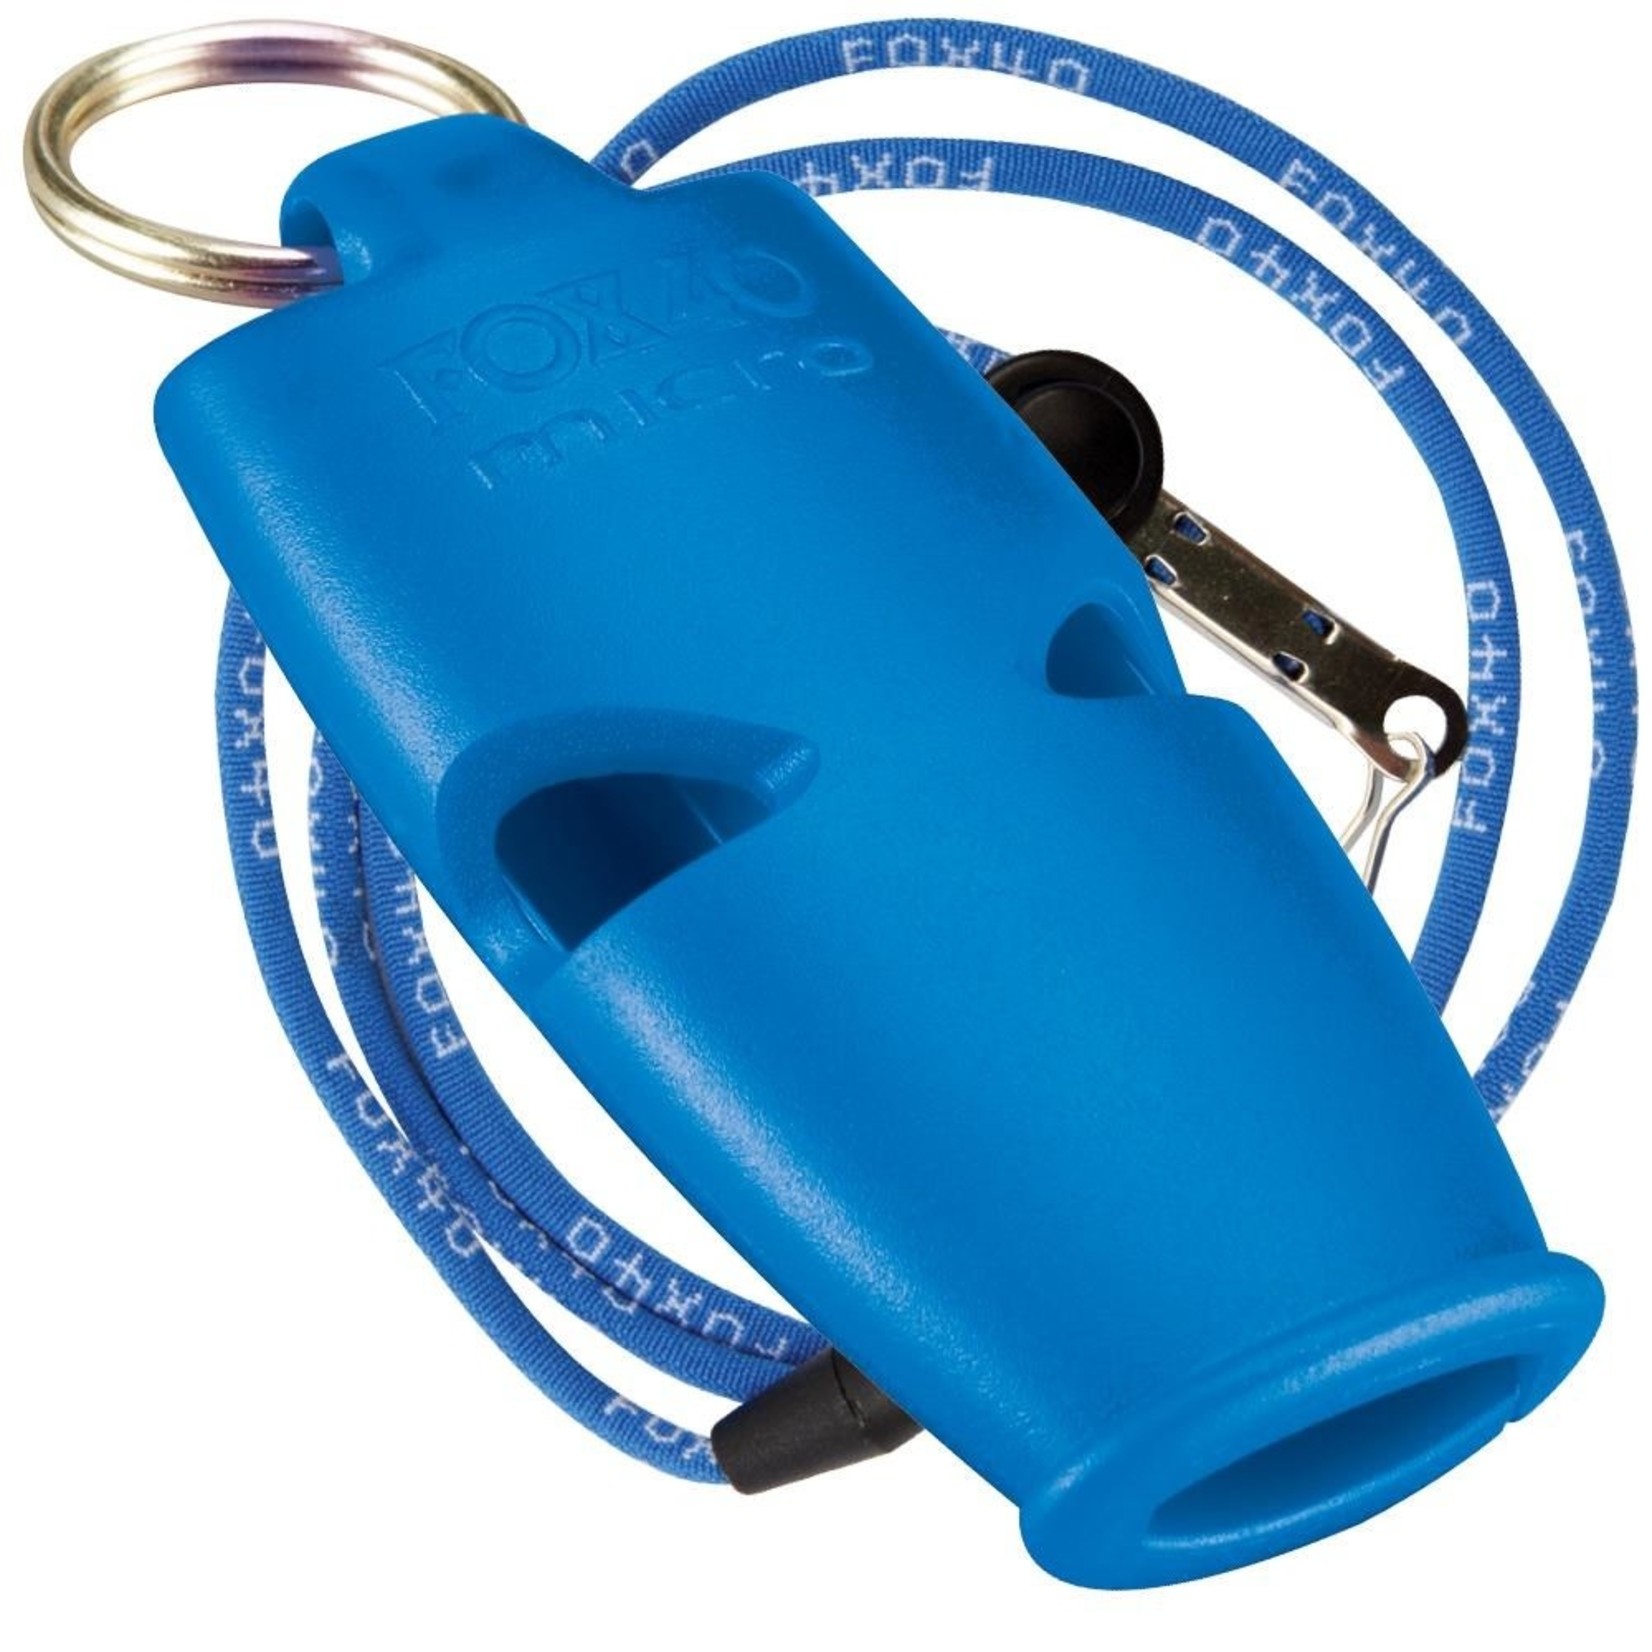 Fox 40 Micro whistle with string